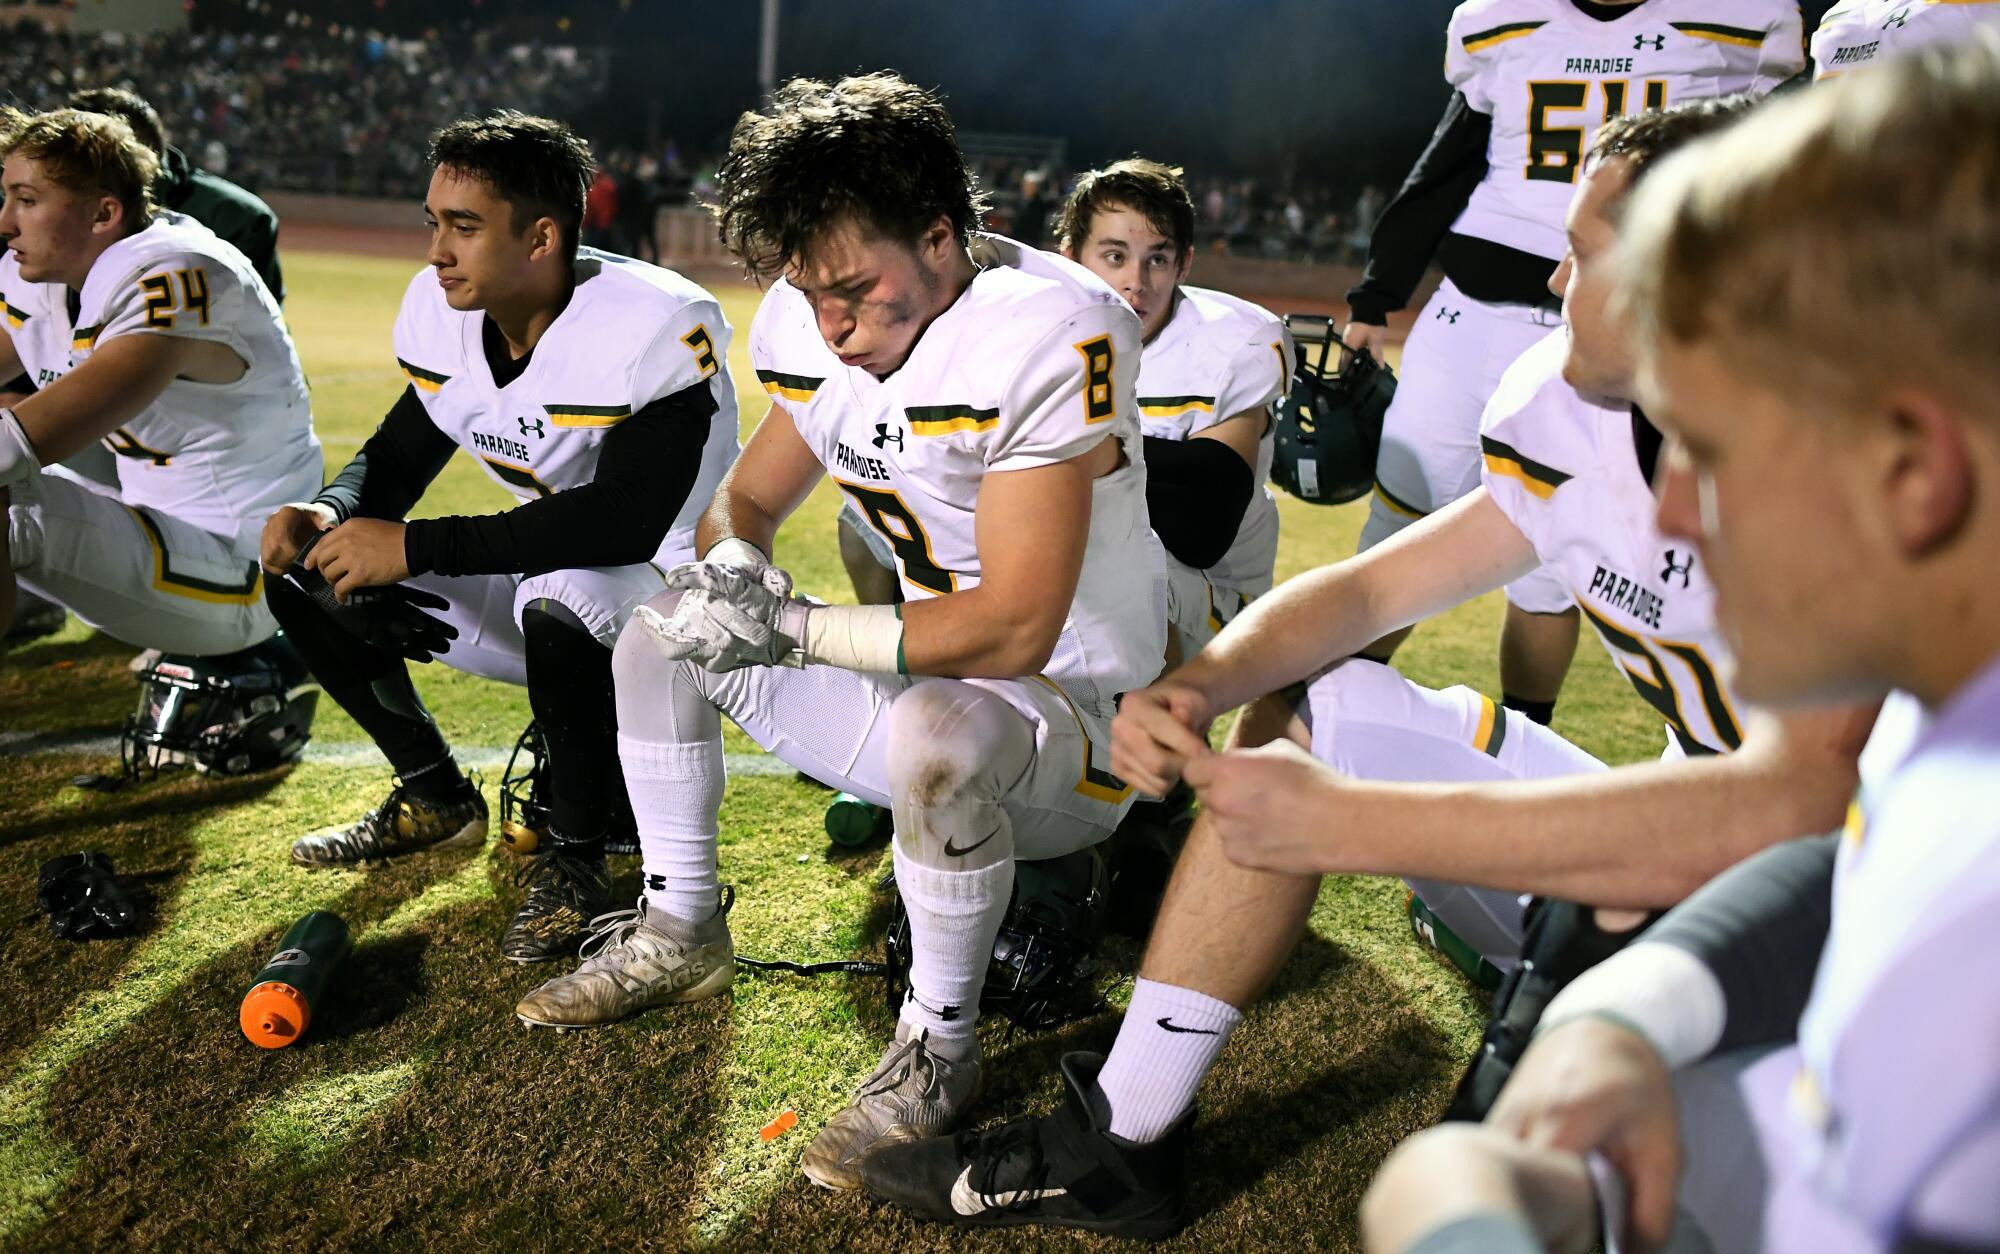 Paradise's Brenden Moon (8) takes a break at halftime.